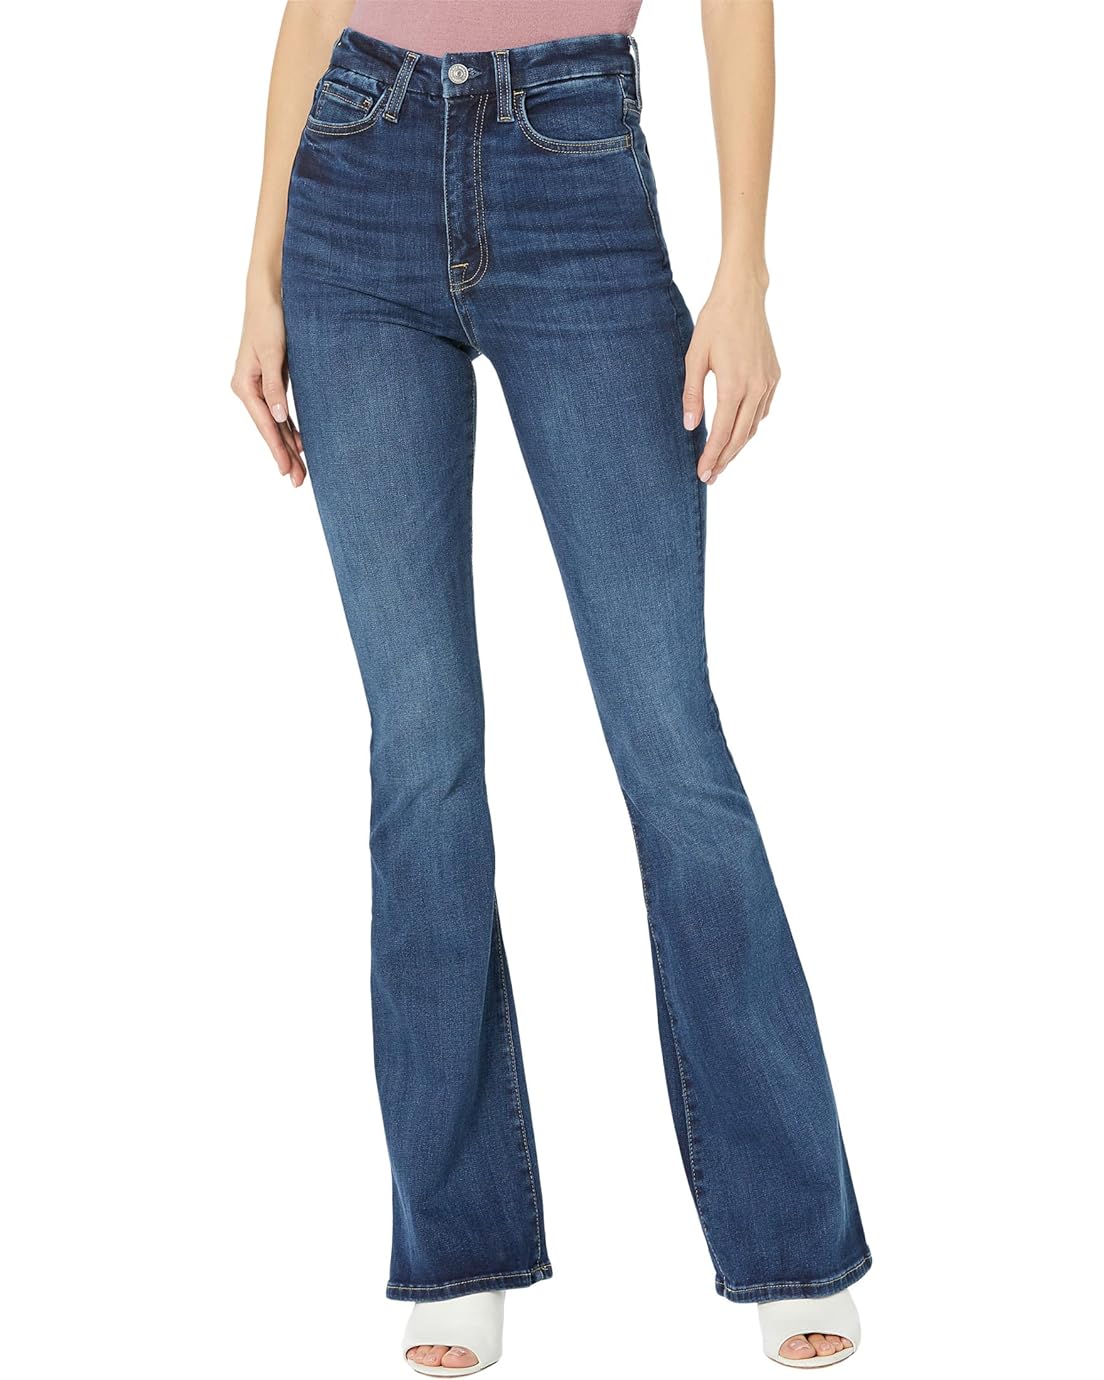 7 For All Mankind No Filter Skinny Boot in Sophie Blue